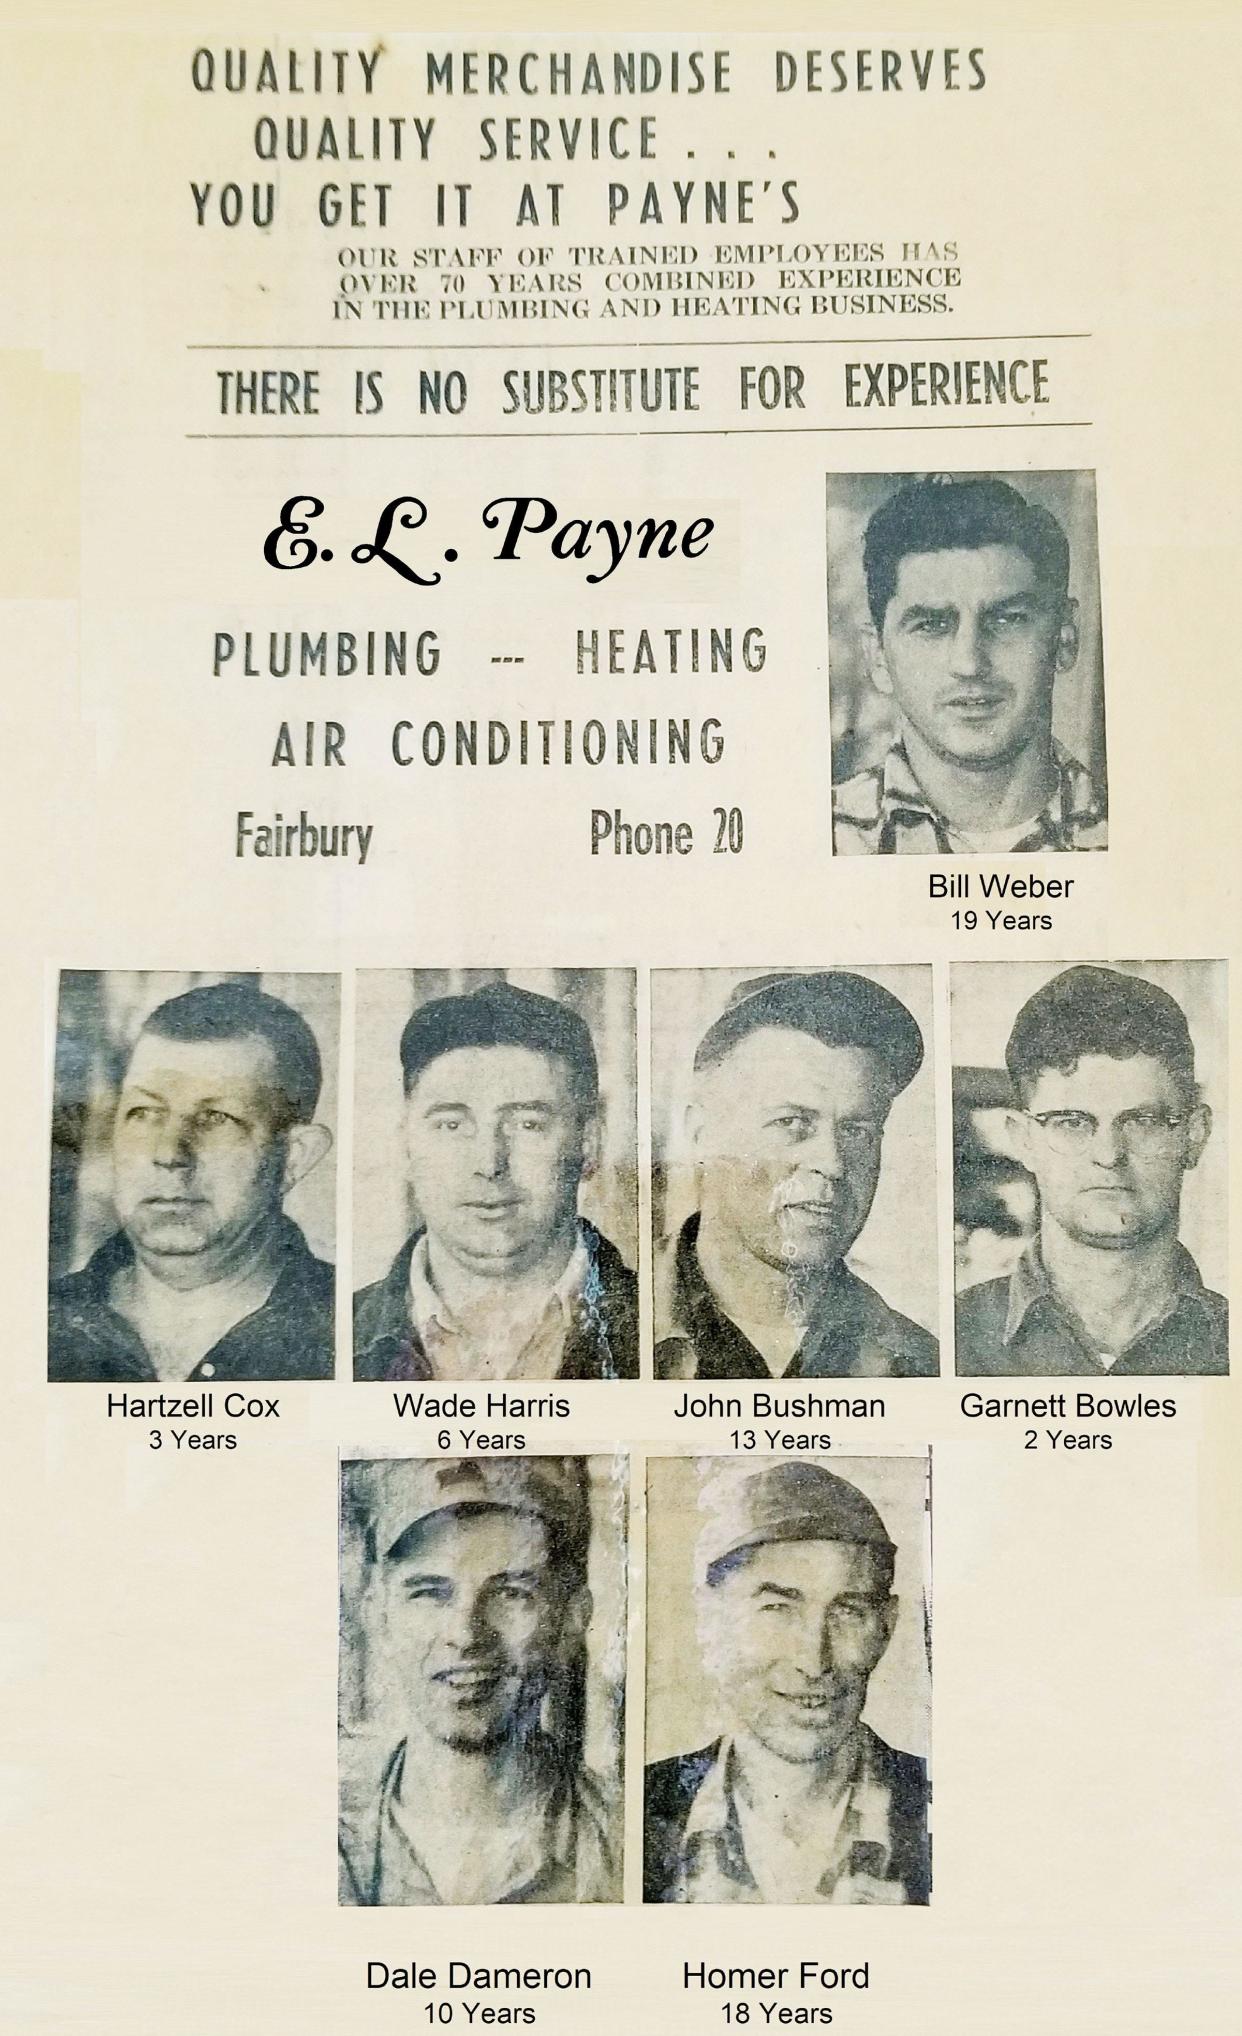 Plumbers working at the E.L. Payne plumbing firm in 1957.